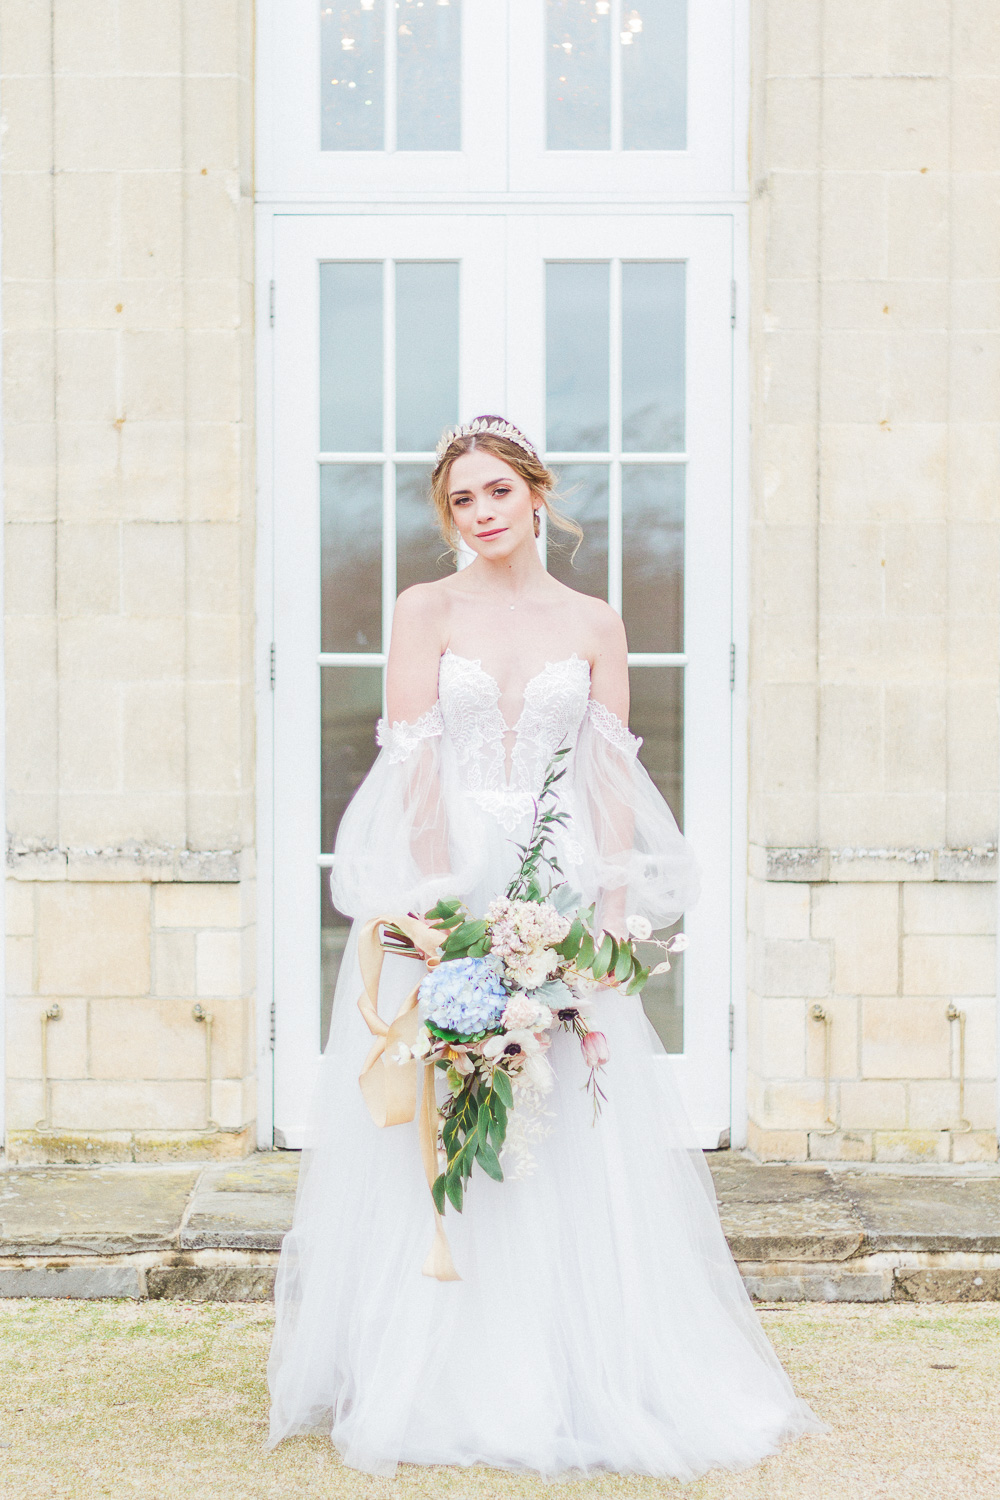 Bride with a spring bouquet at Froyle Park wedding venue in the UK